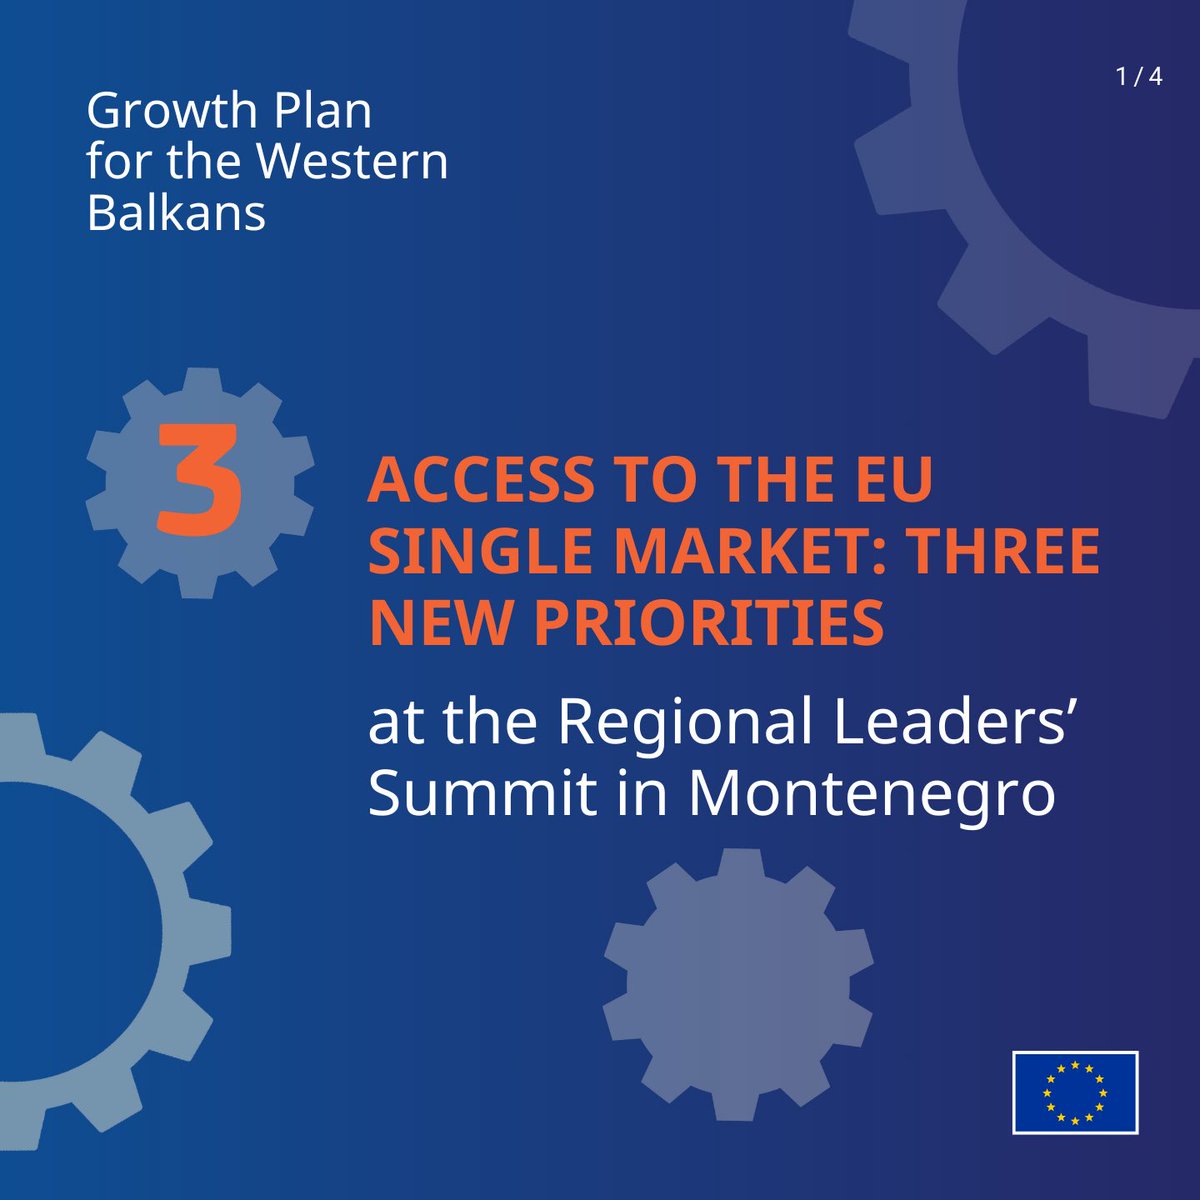 The work on the Growth Plan started with great commitment & dedication. Happy to attend a new round of #WesternBalkans Leaders Meeting in #Montenegro 🇲🇪 #Kotor Ready to discuss 3 new strategic steps towards integrating the WB6 into the EU Single Market.